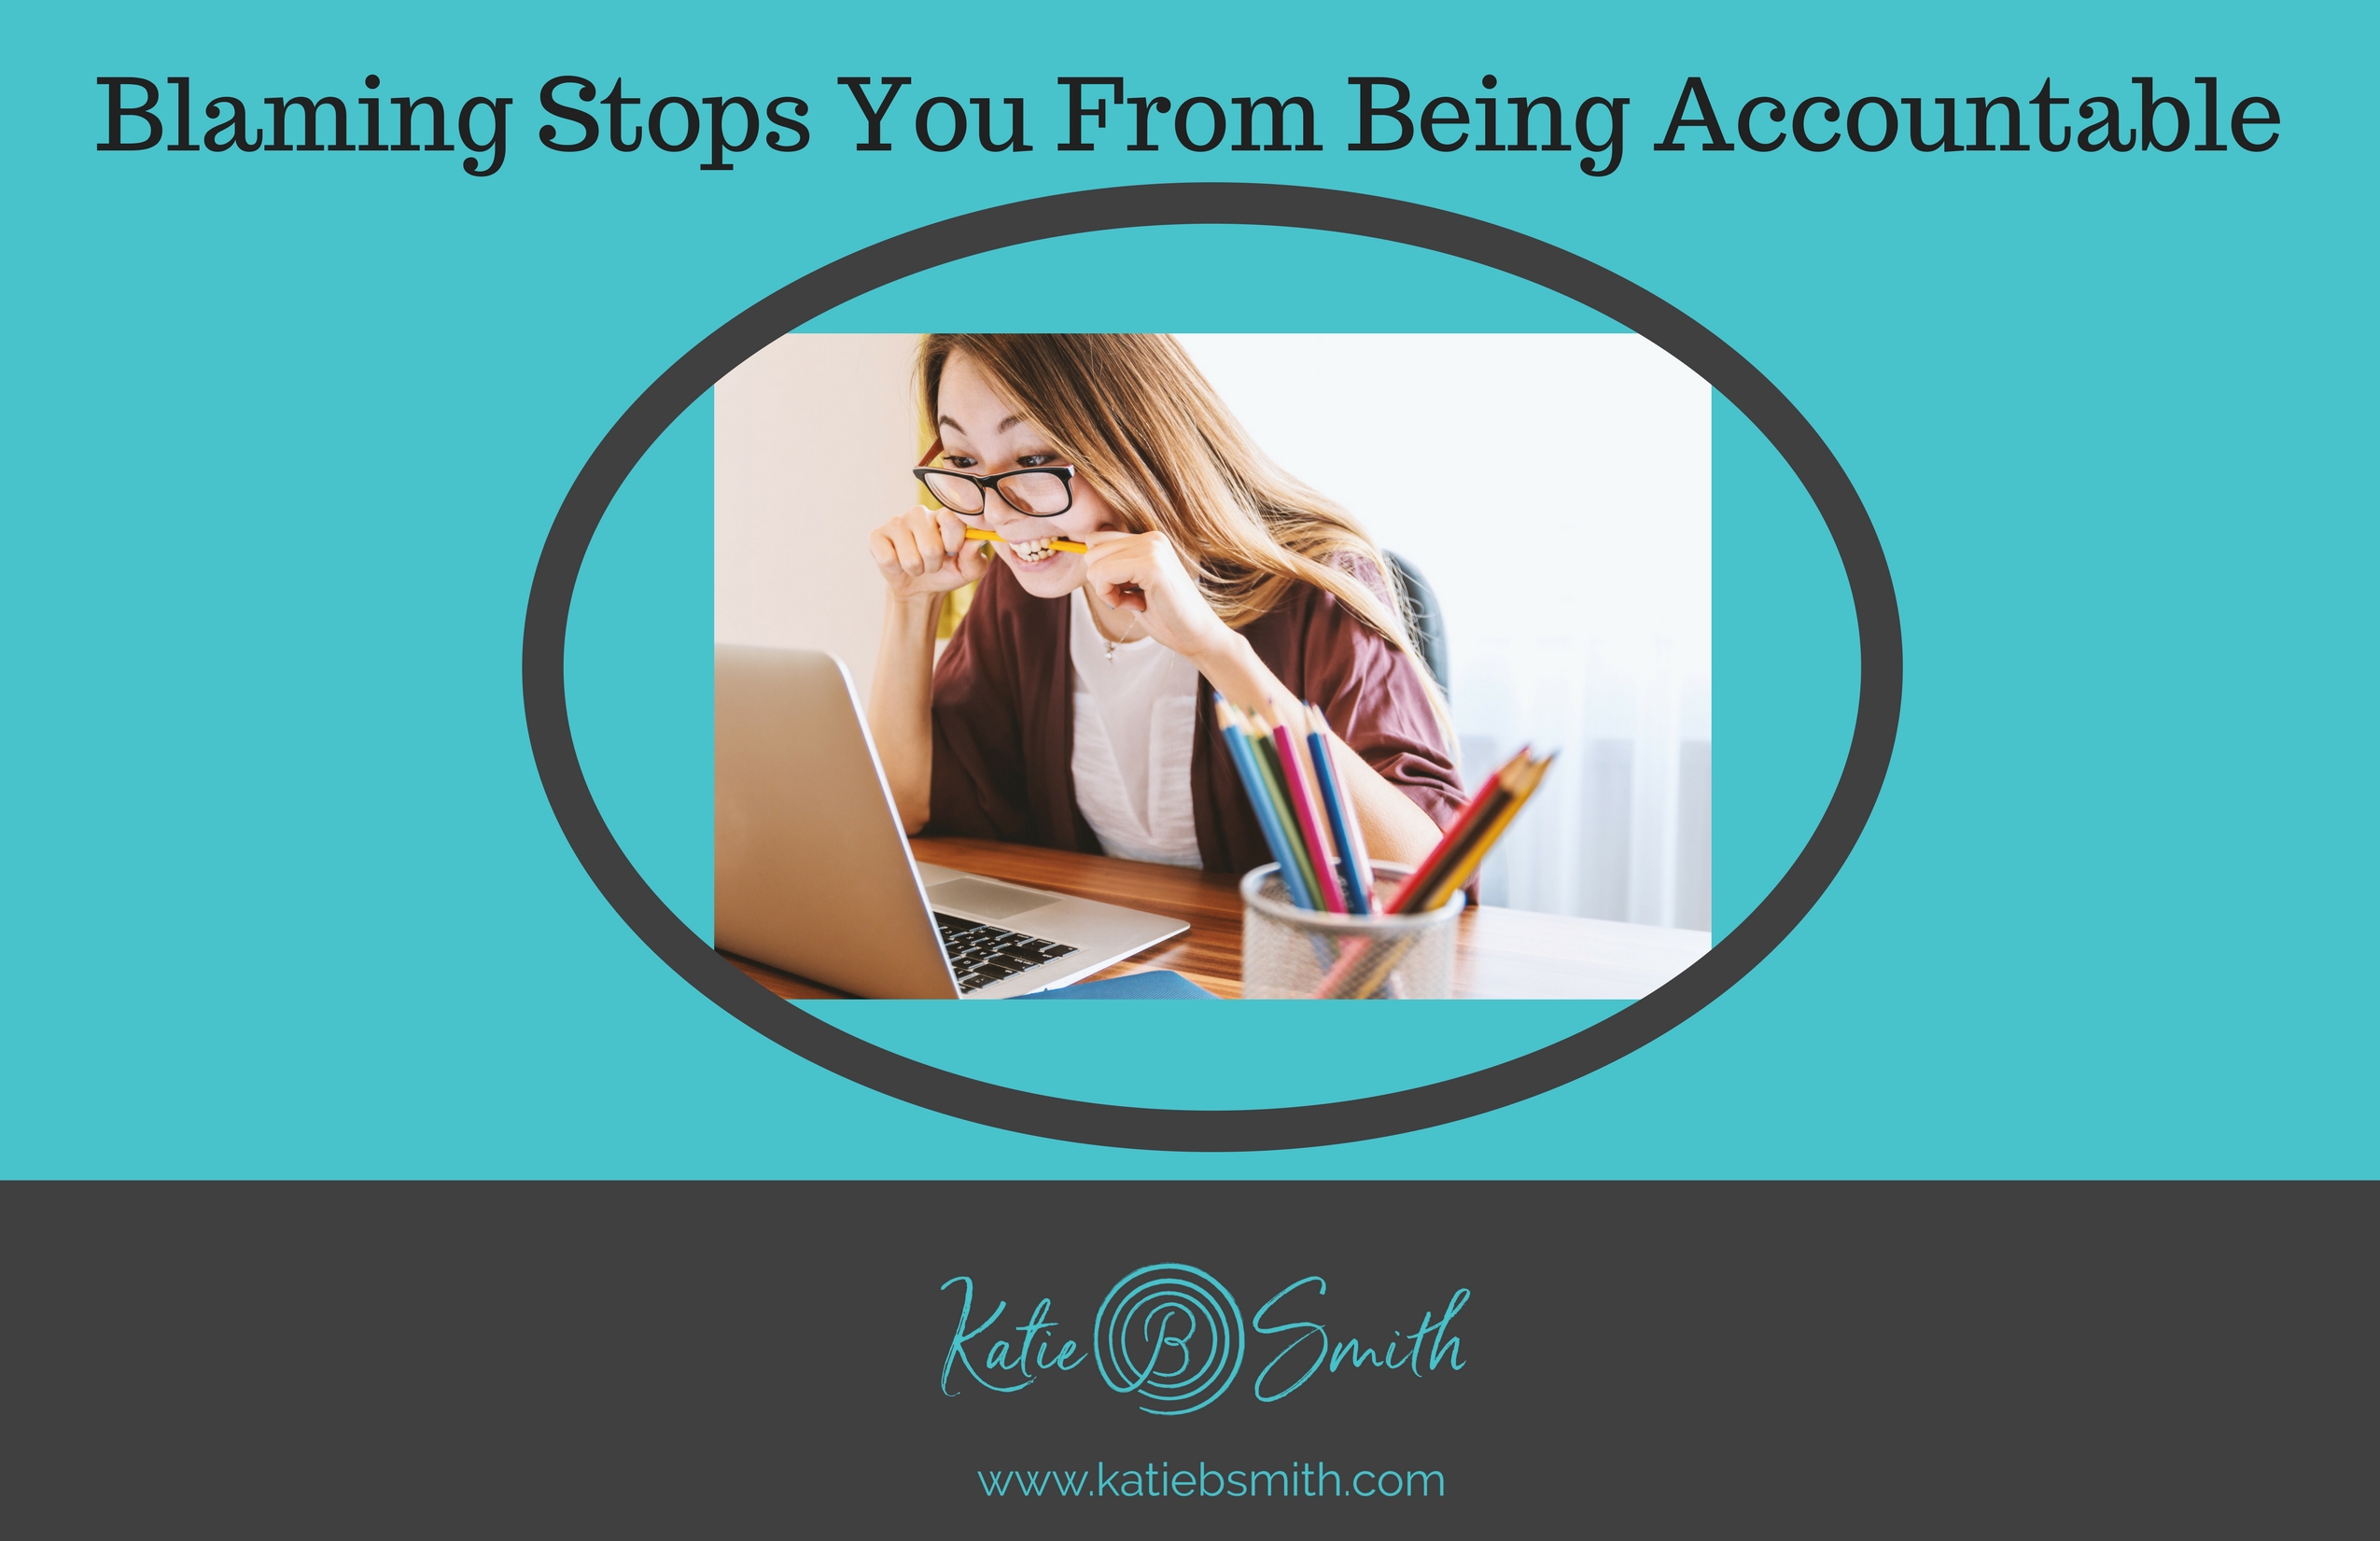 Blaming stops you from being accountable